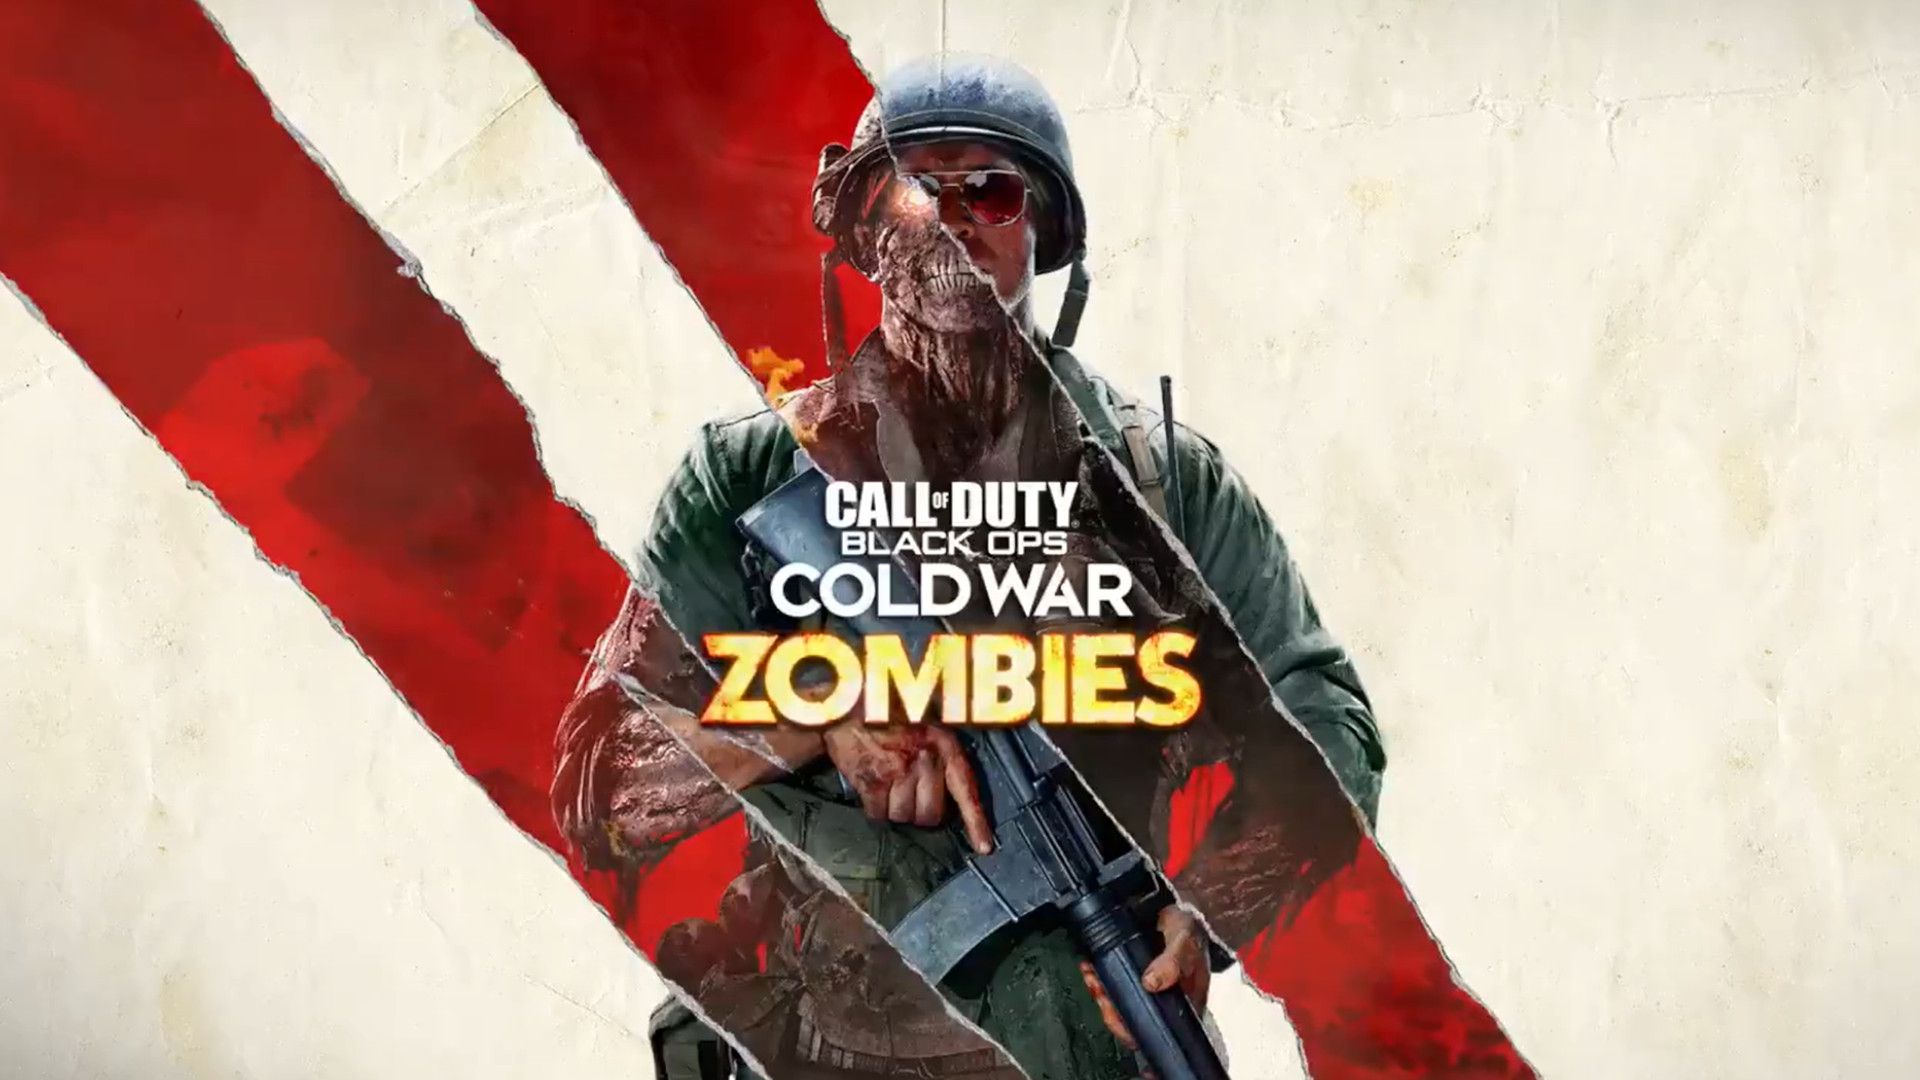 Call of Duty: Black Ops Cold War Zombies trailer coming this week